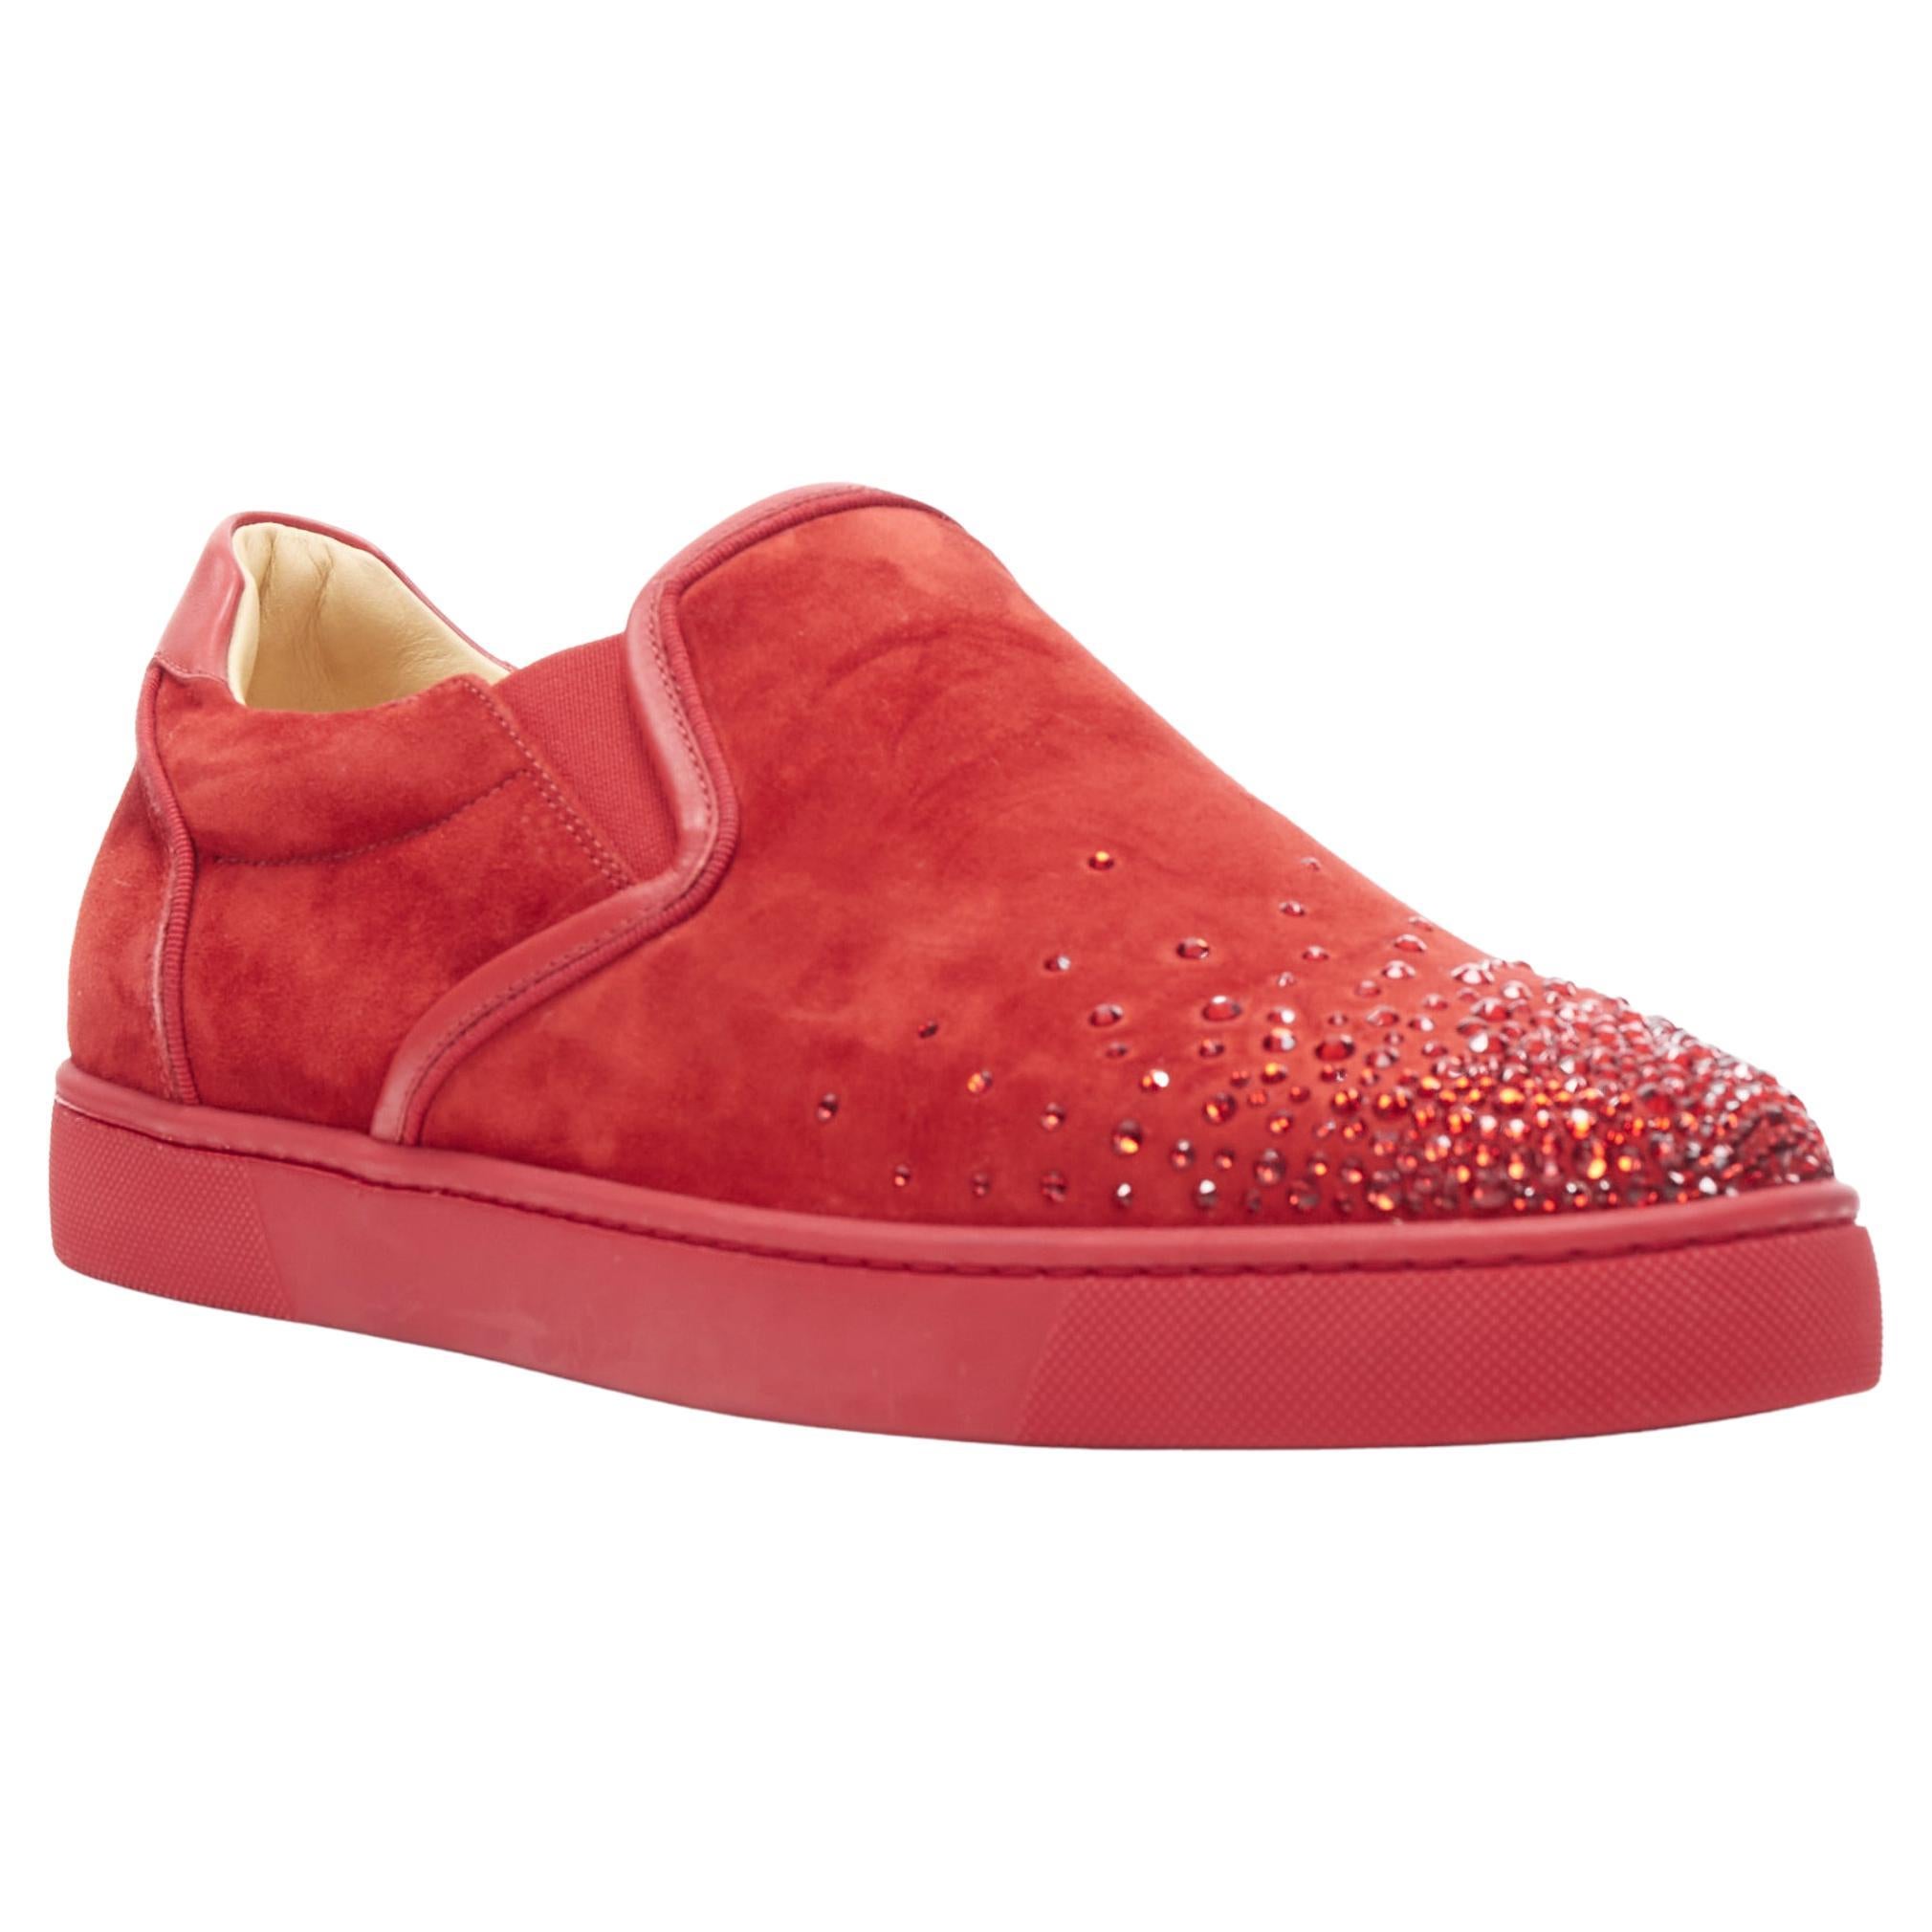 new CHRISTIAN LOUBOUTIN Sailor Boat red suede degrade strass low sneaker EU42